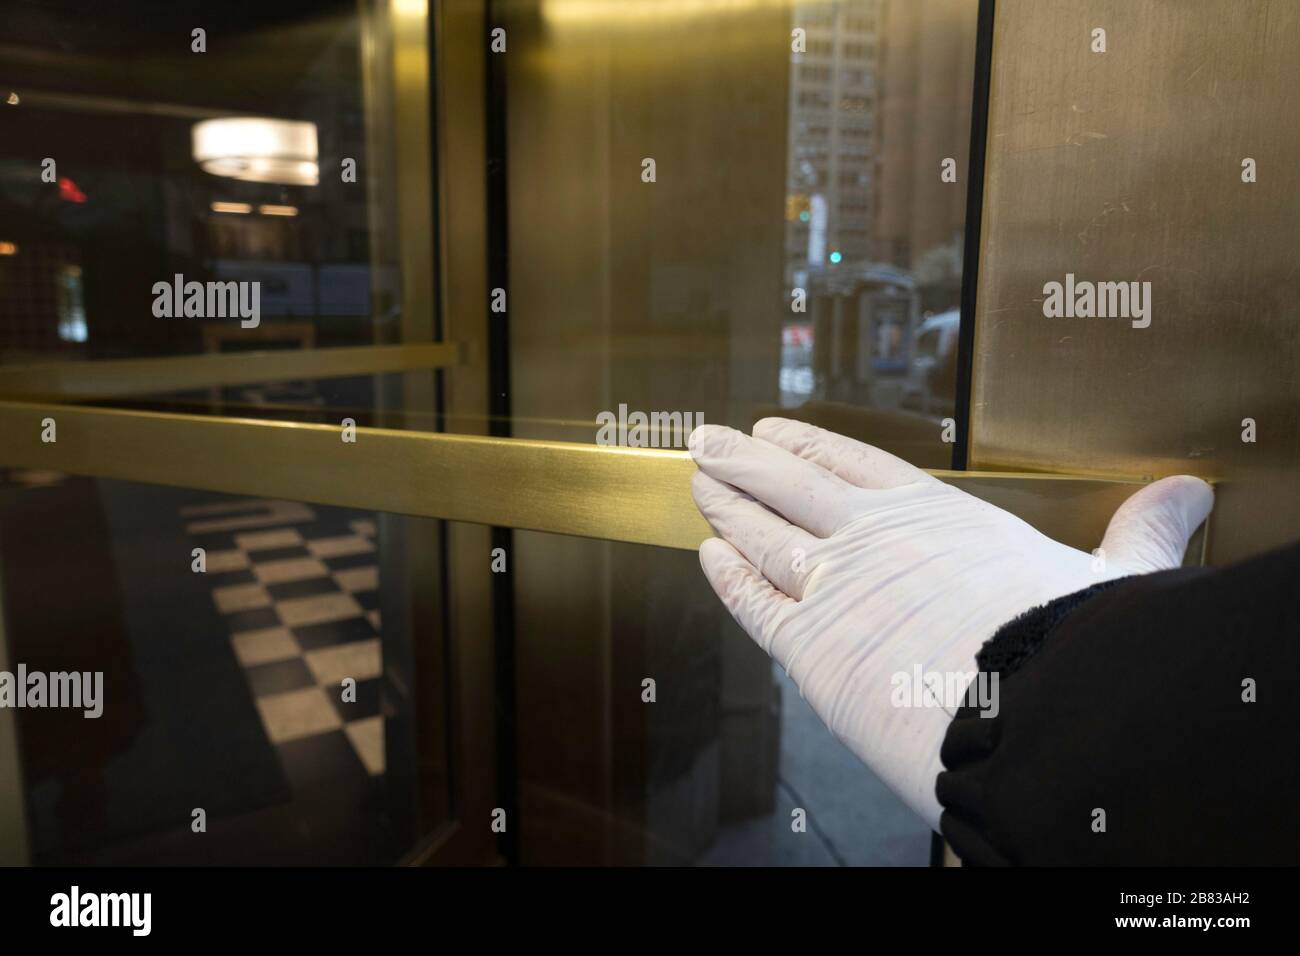 A New York City resident pushes a revolving door with a gloved hand as a precaution against germs during the COVID-19 Pandemic, USA Stock Photo